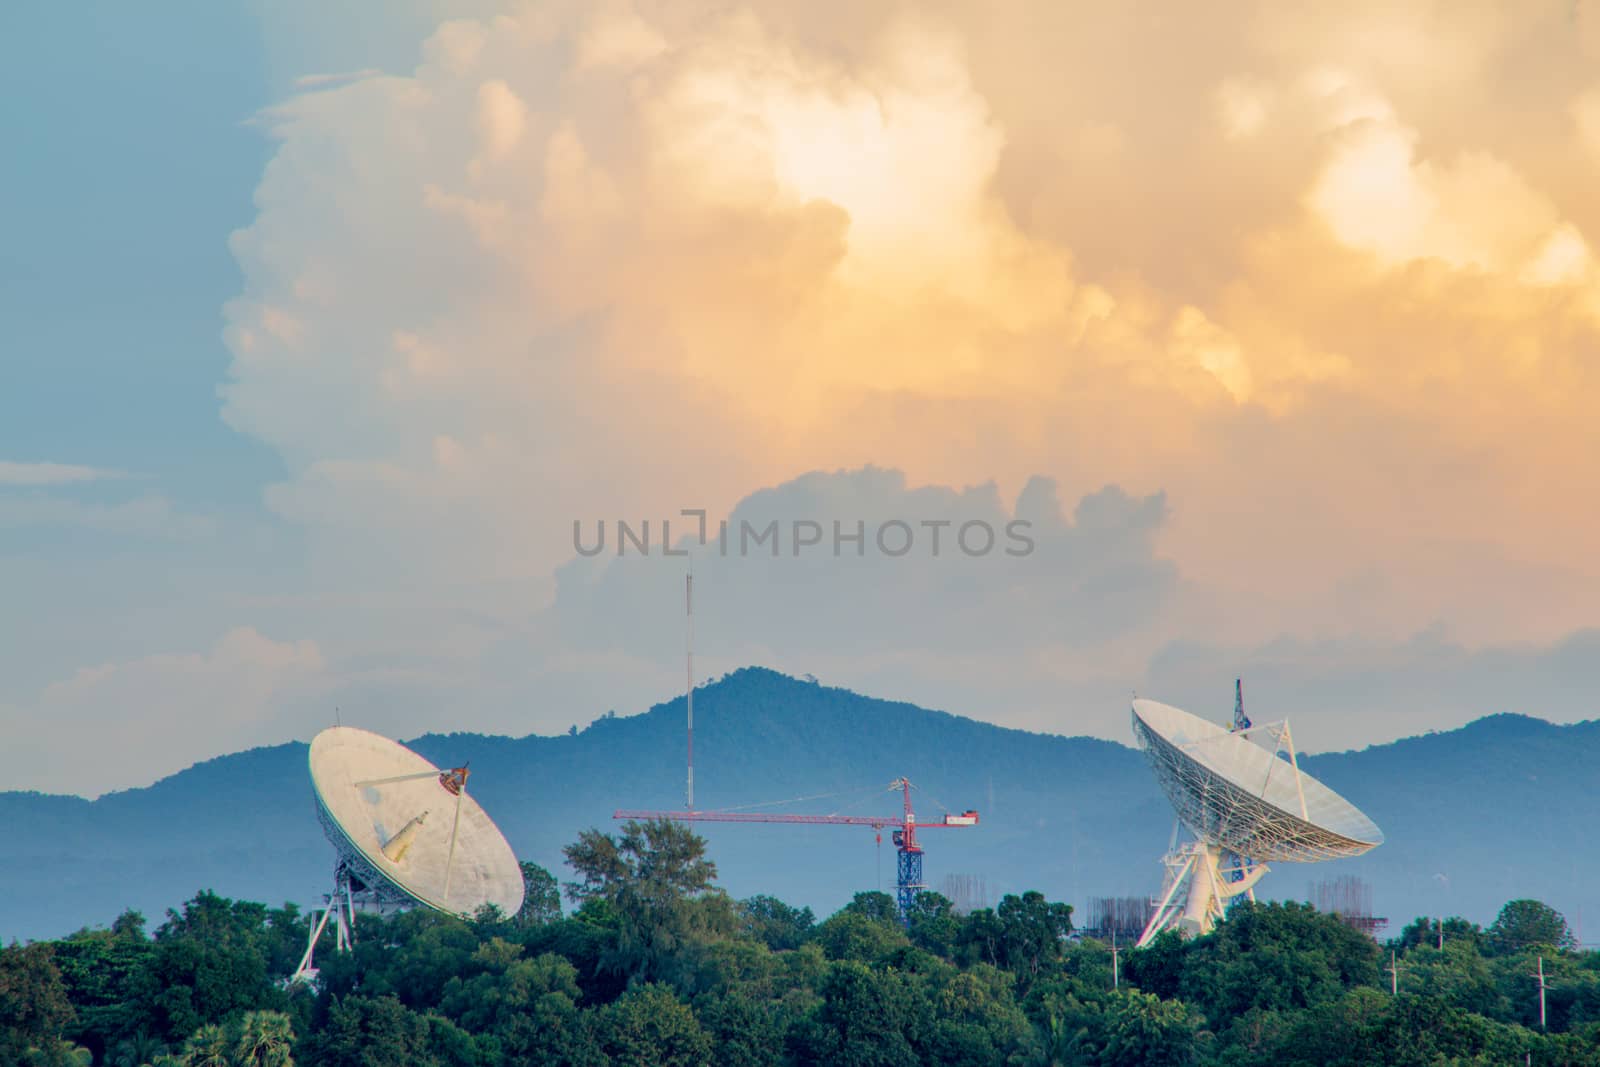 The gold sky with the gold cloud and two big satellite by peerapixs